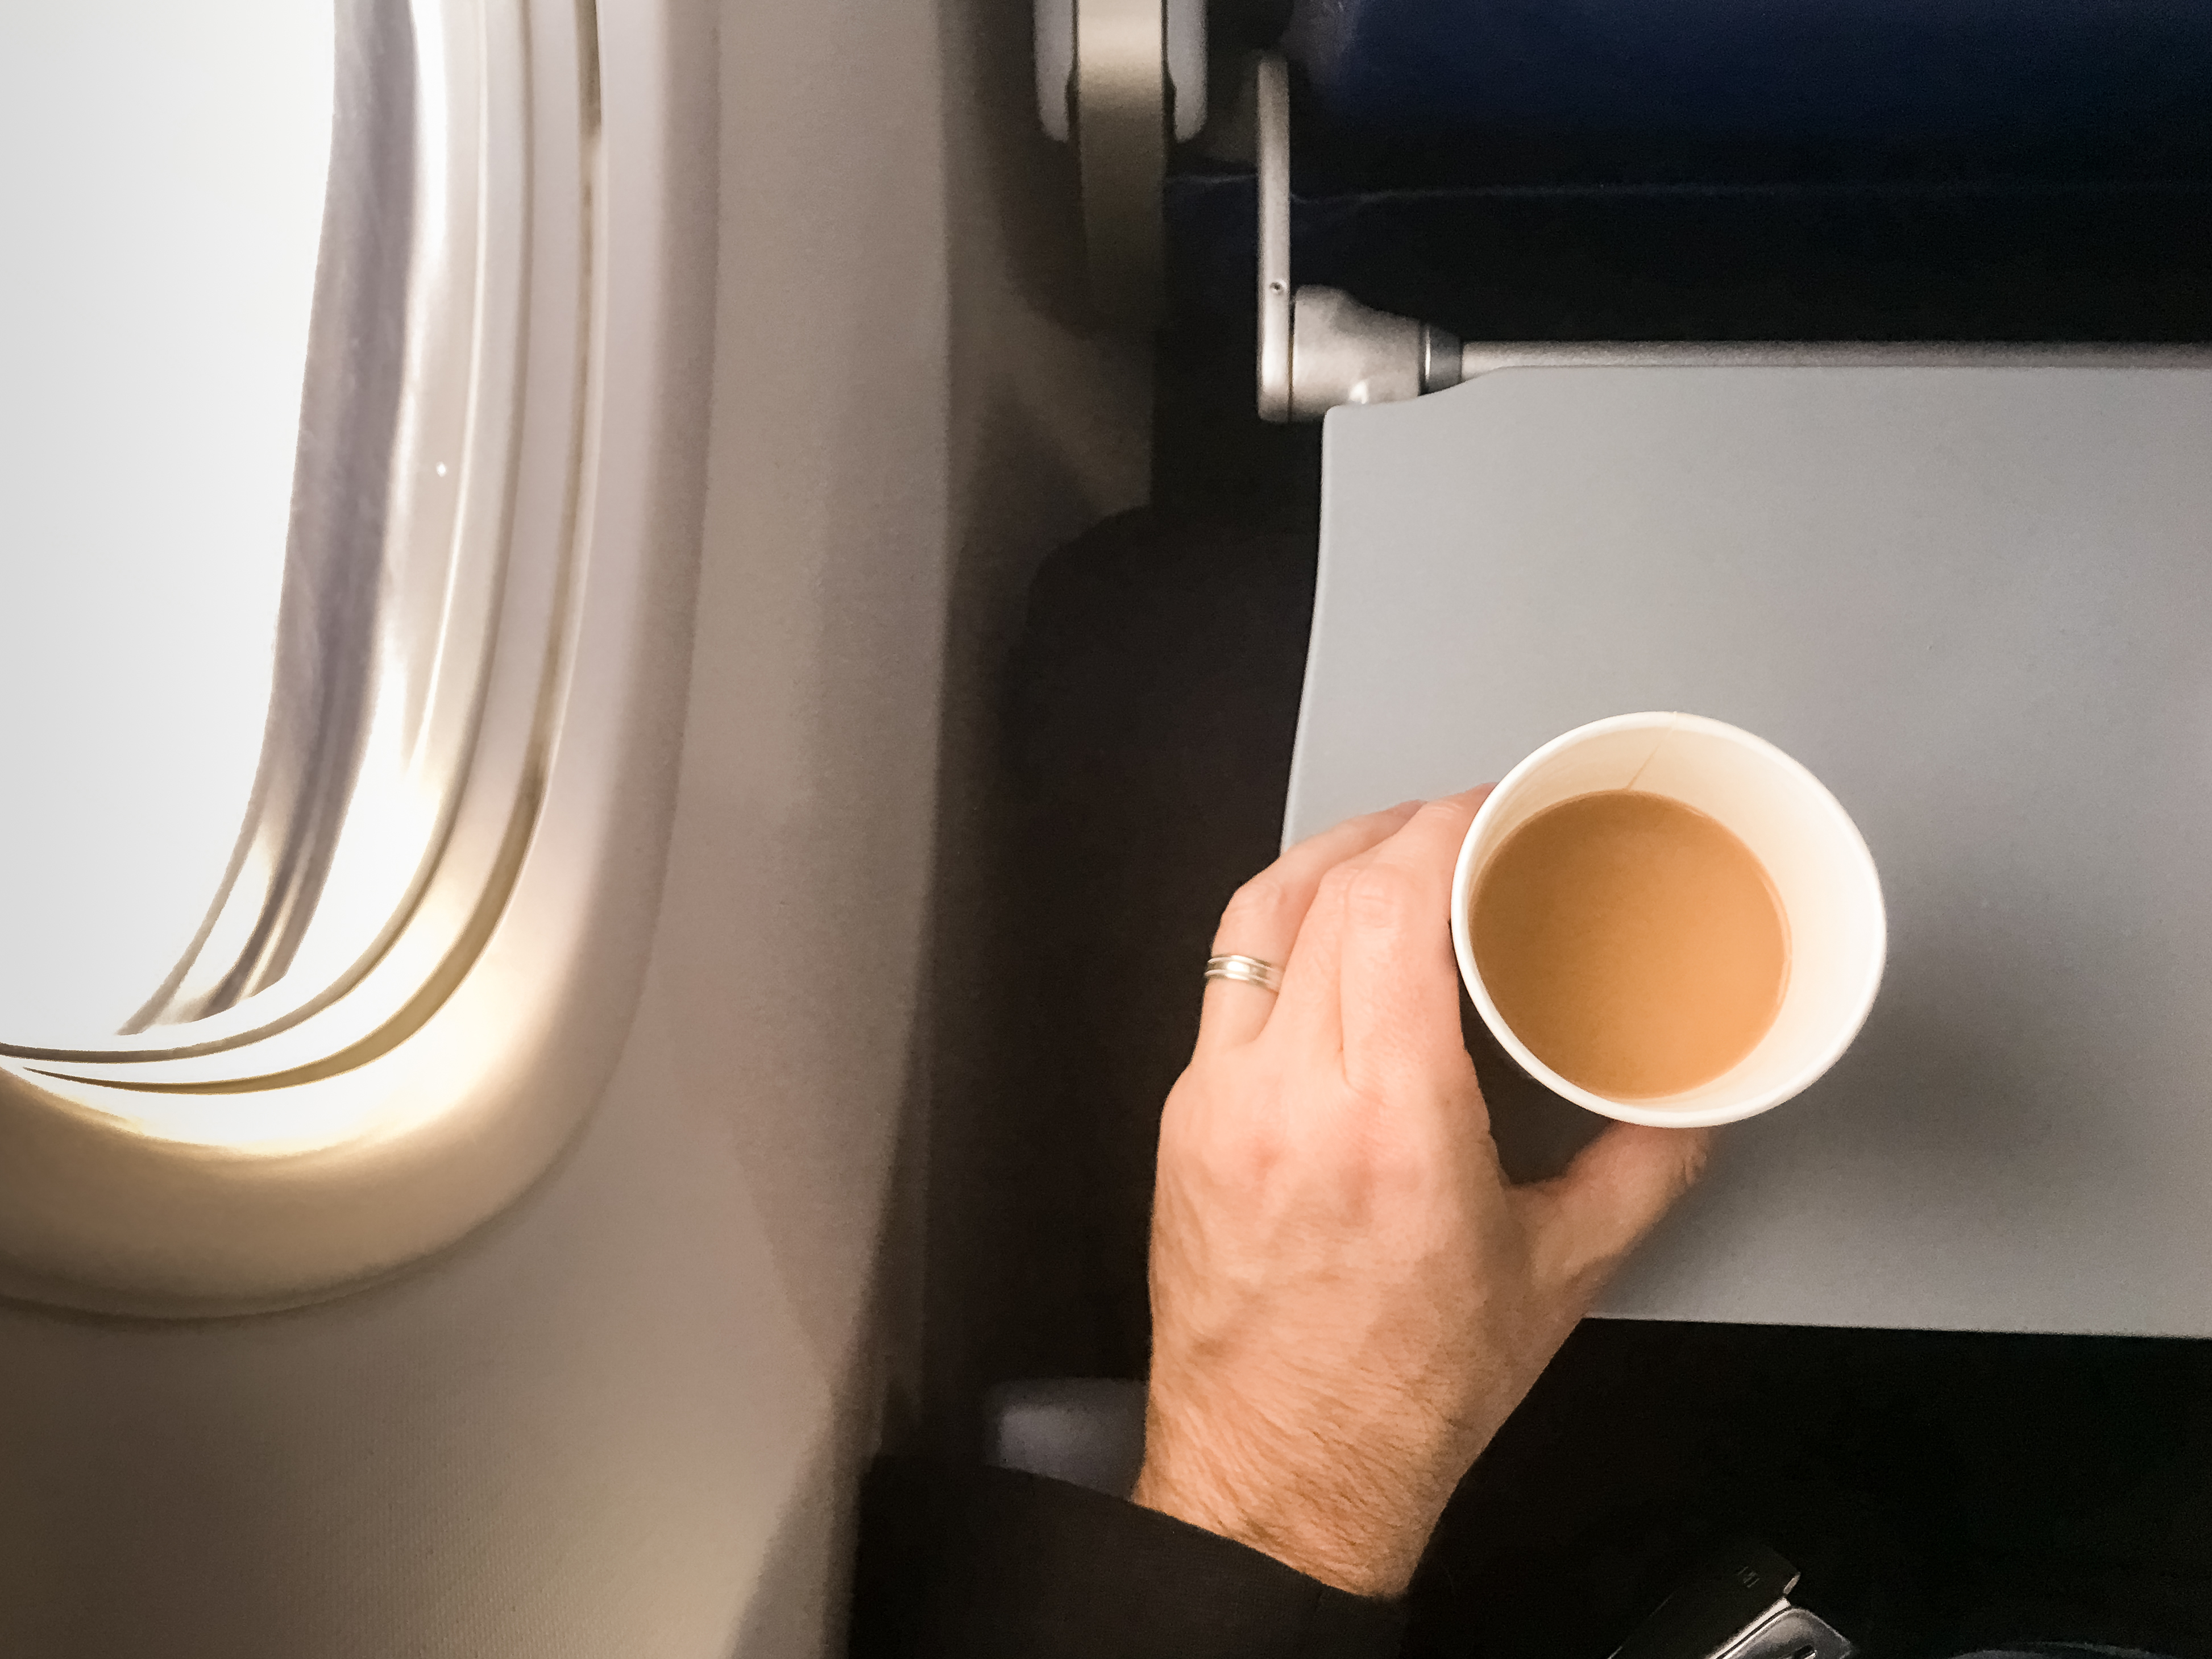 Male passenger holding a cup of coffee in aircraft